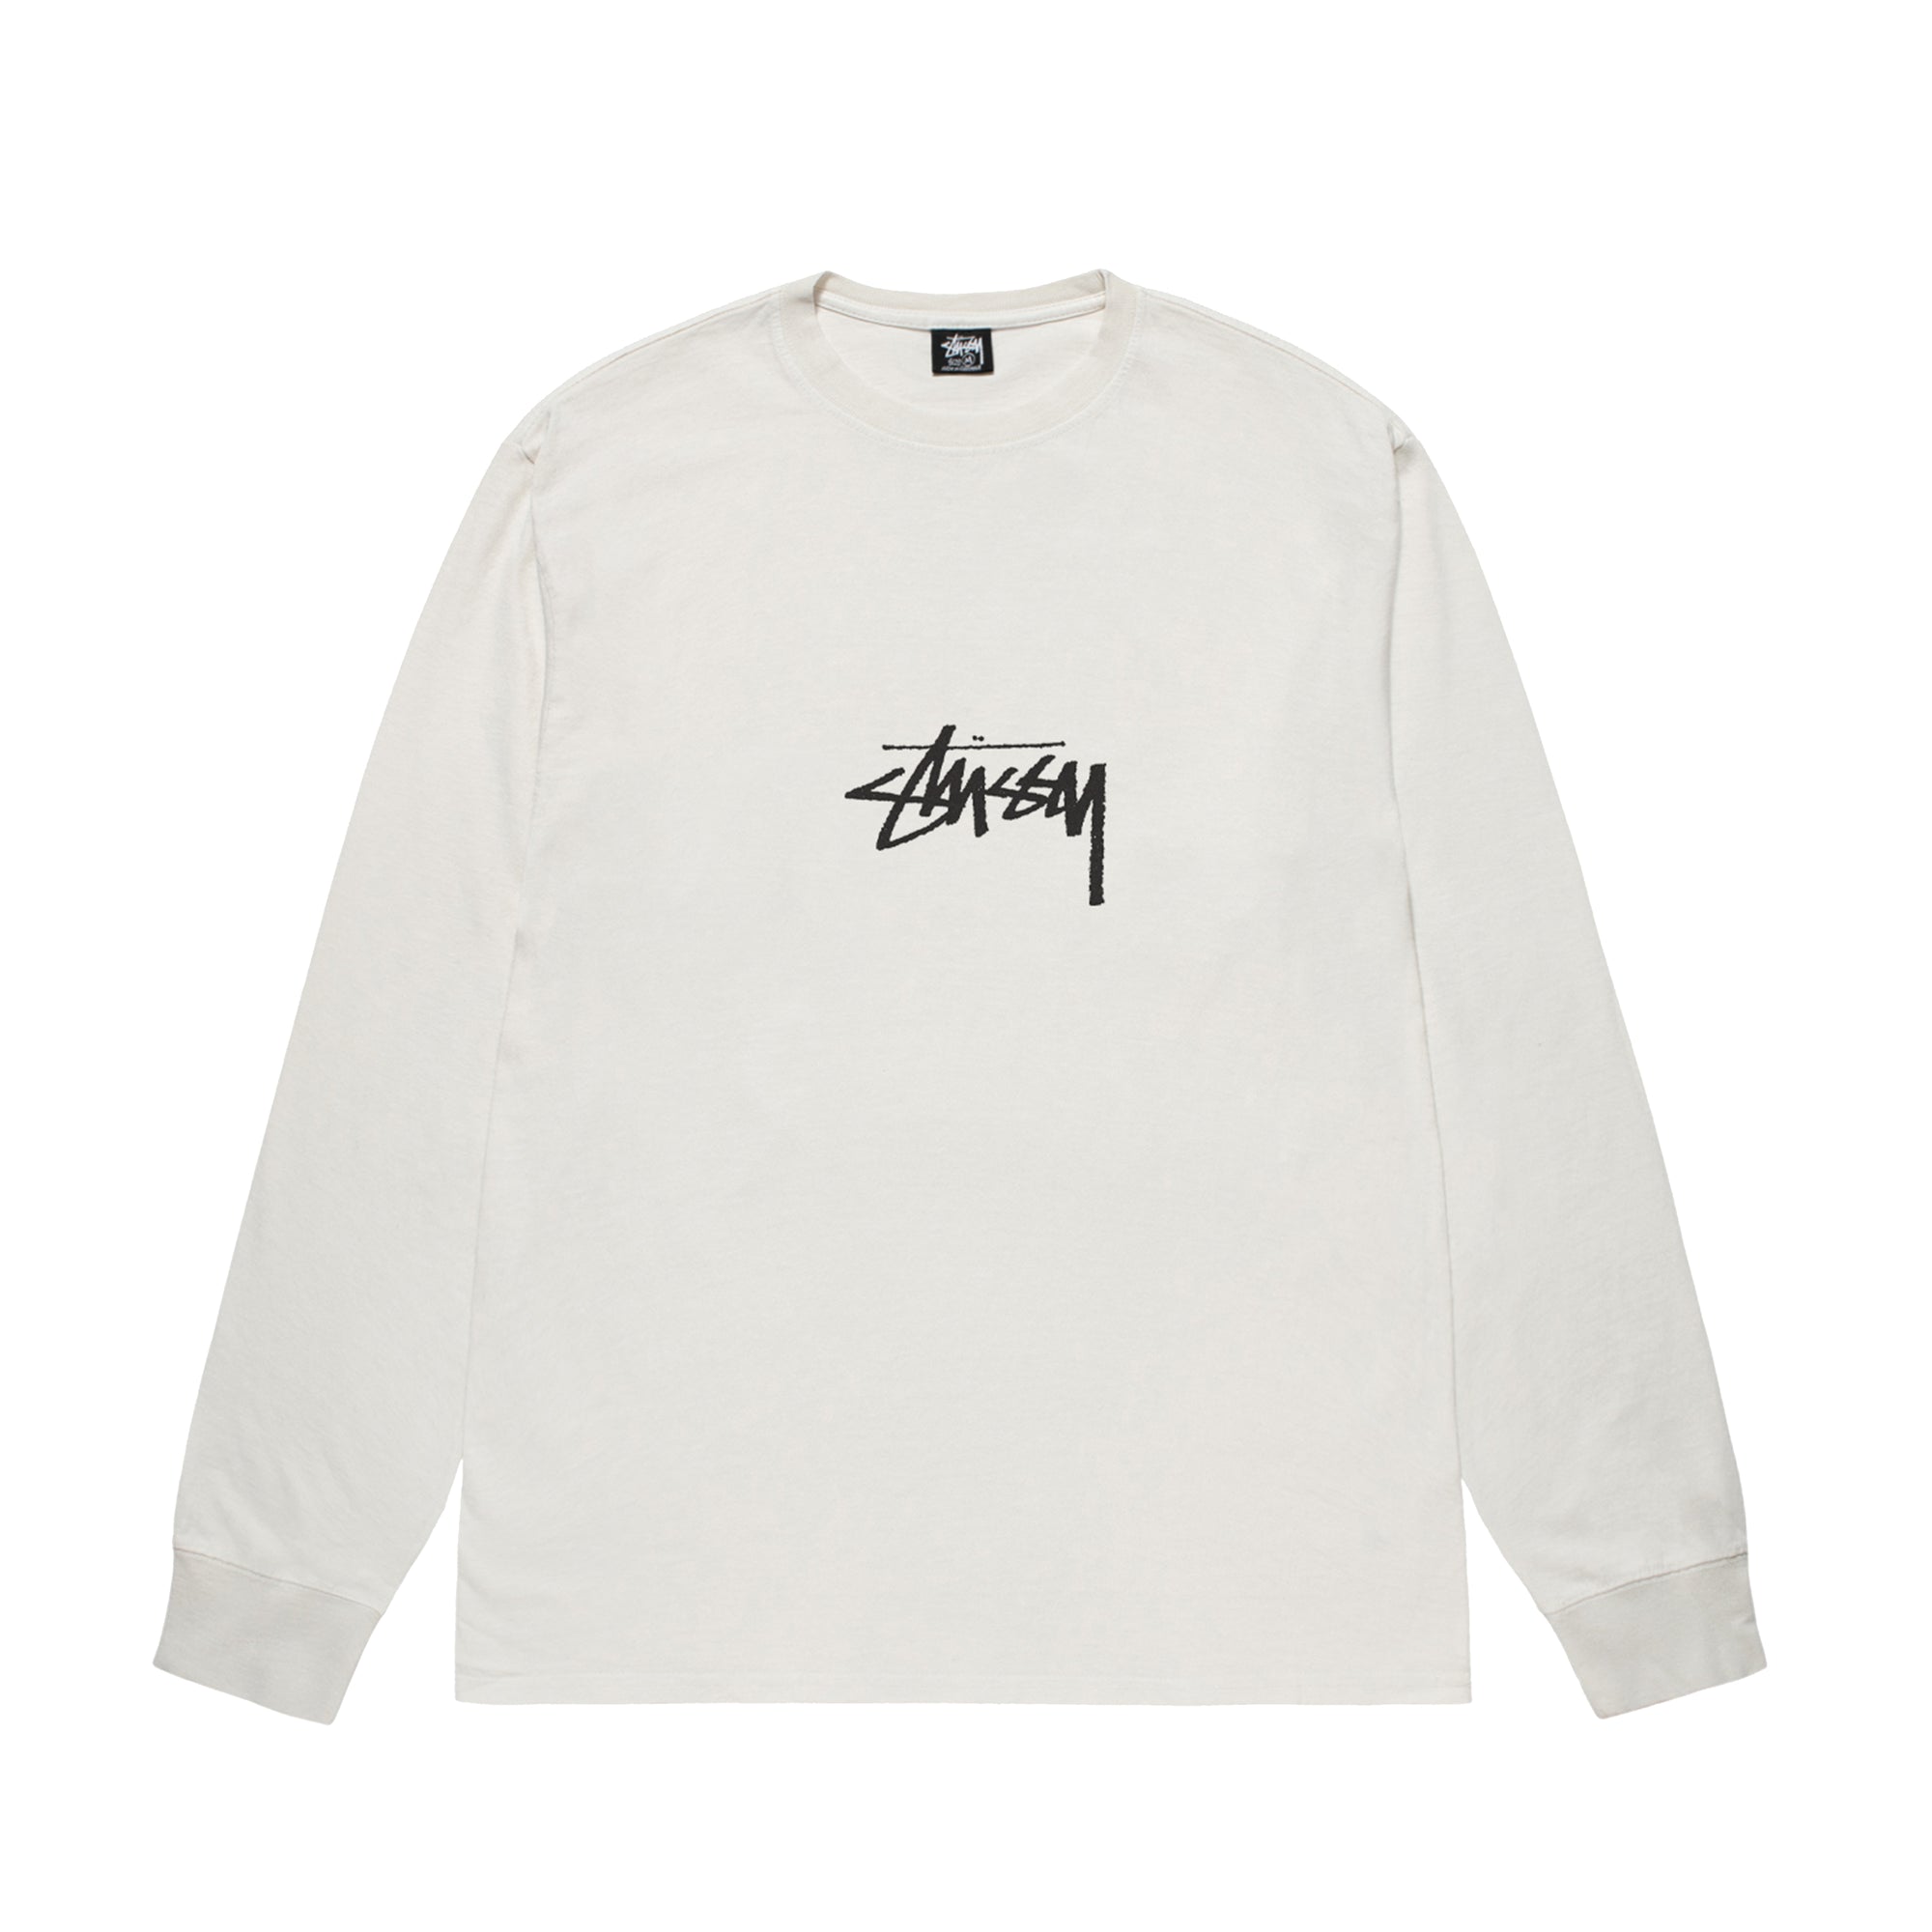 Stüssy - Men's Small Stock Pig. Dyed Ls Tee - (Natural) view 1